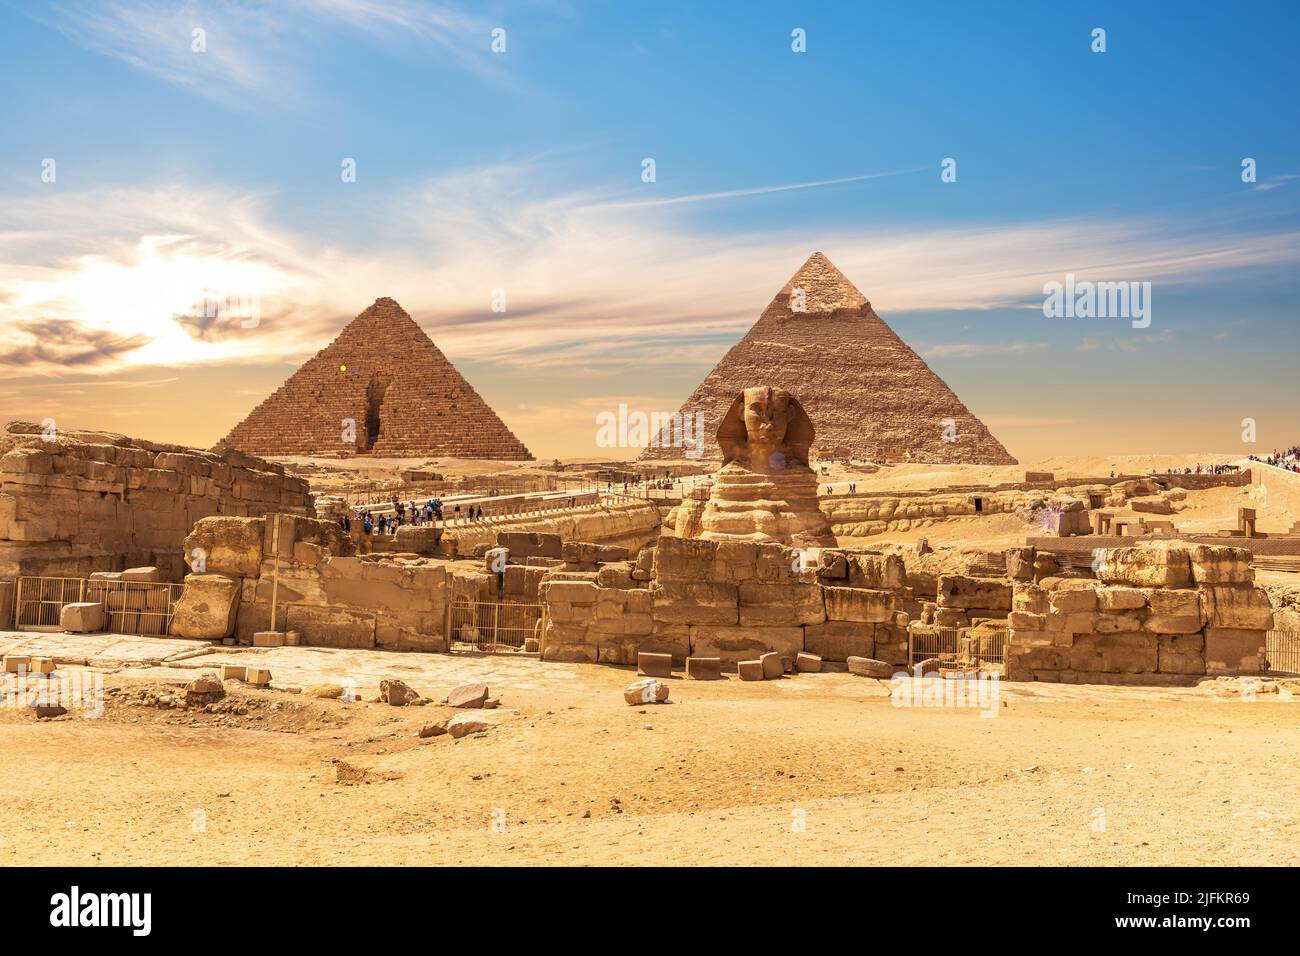 The Great Sphinx by the Pyramids of Egypt, sunset view, Giza. Stock Photo